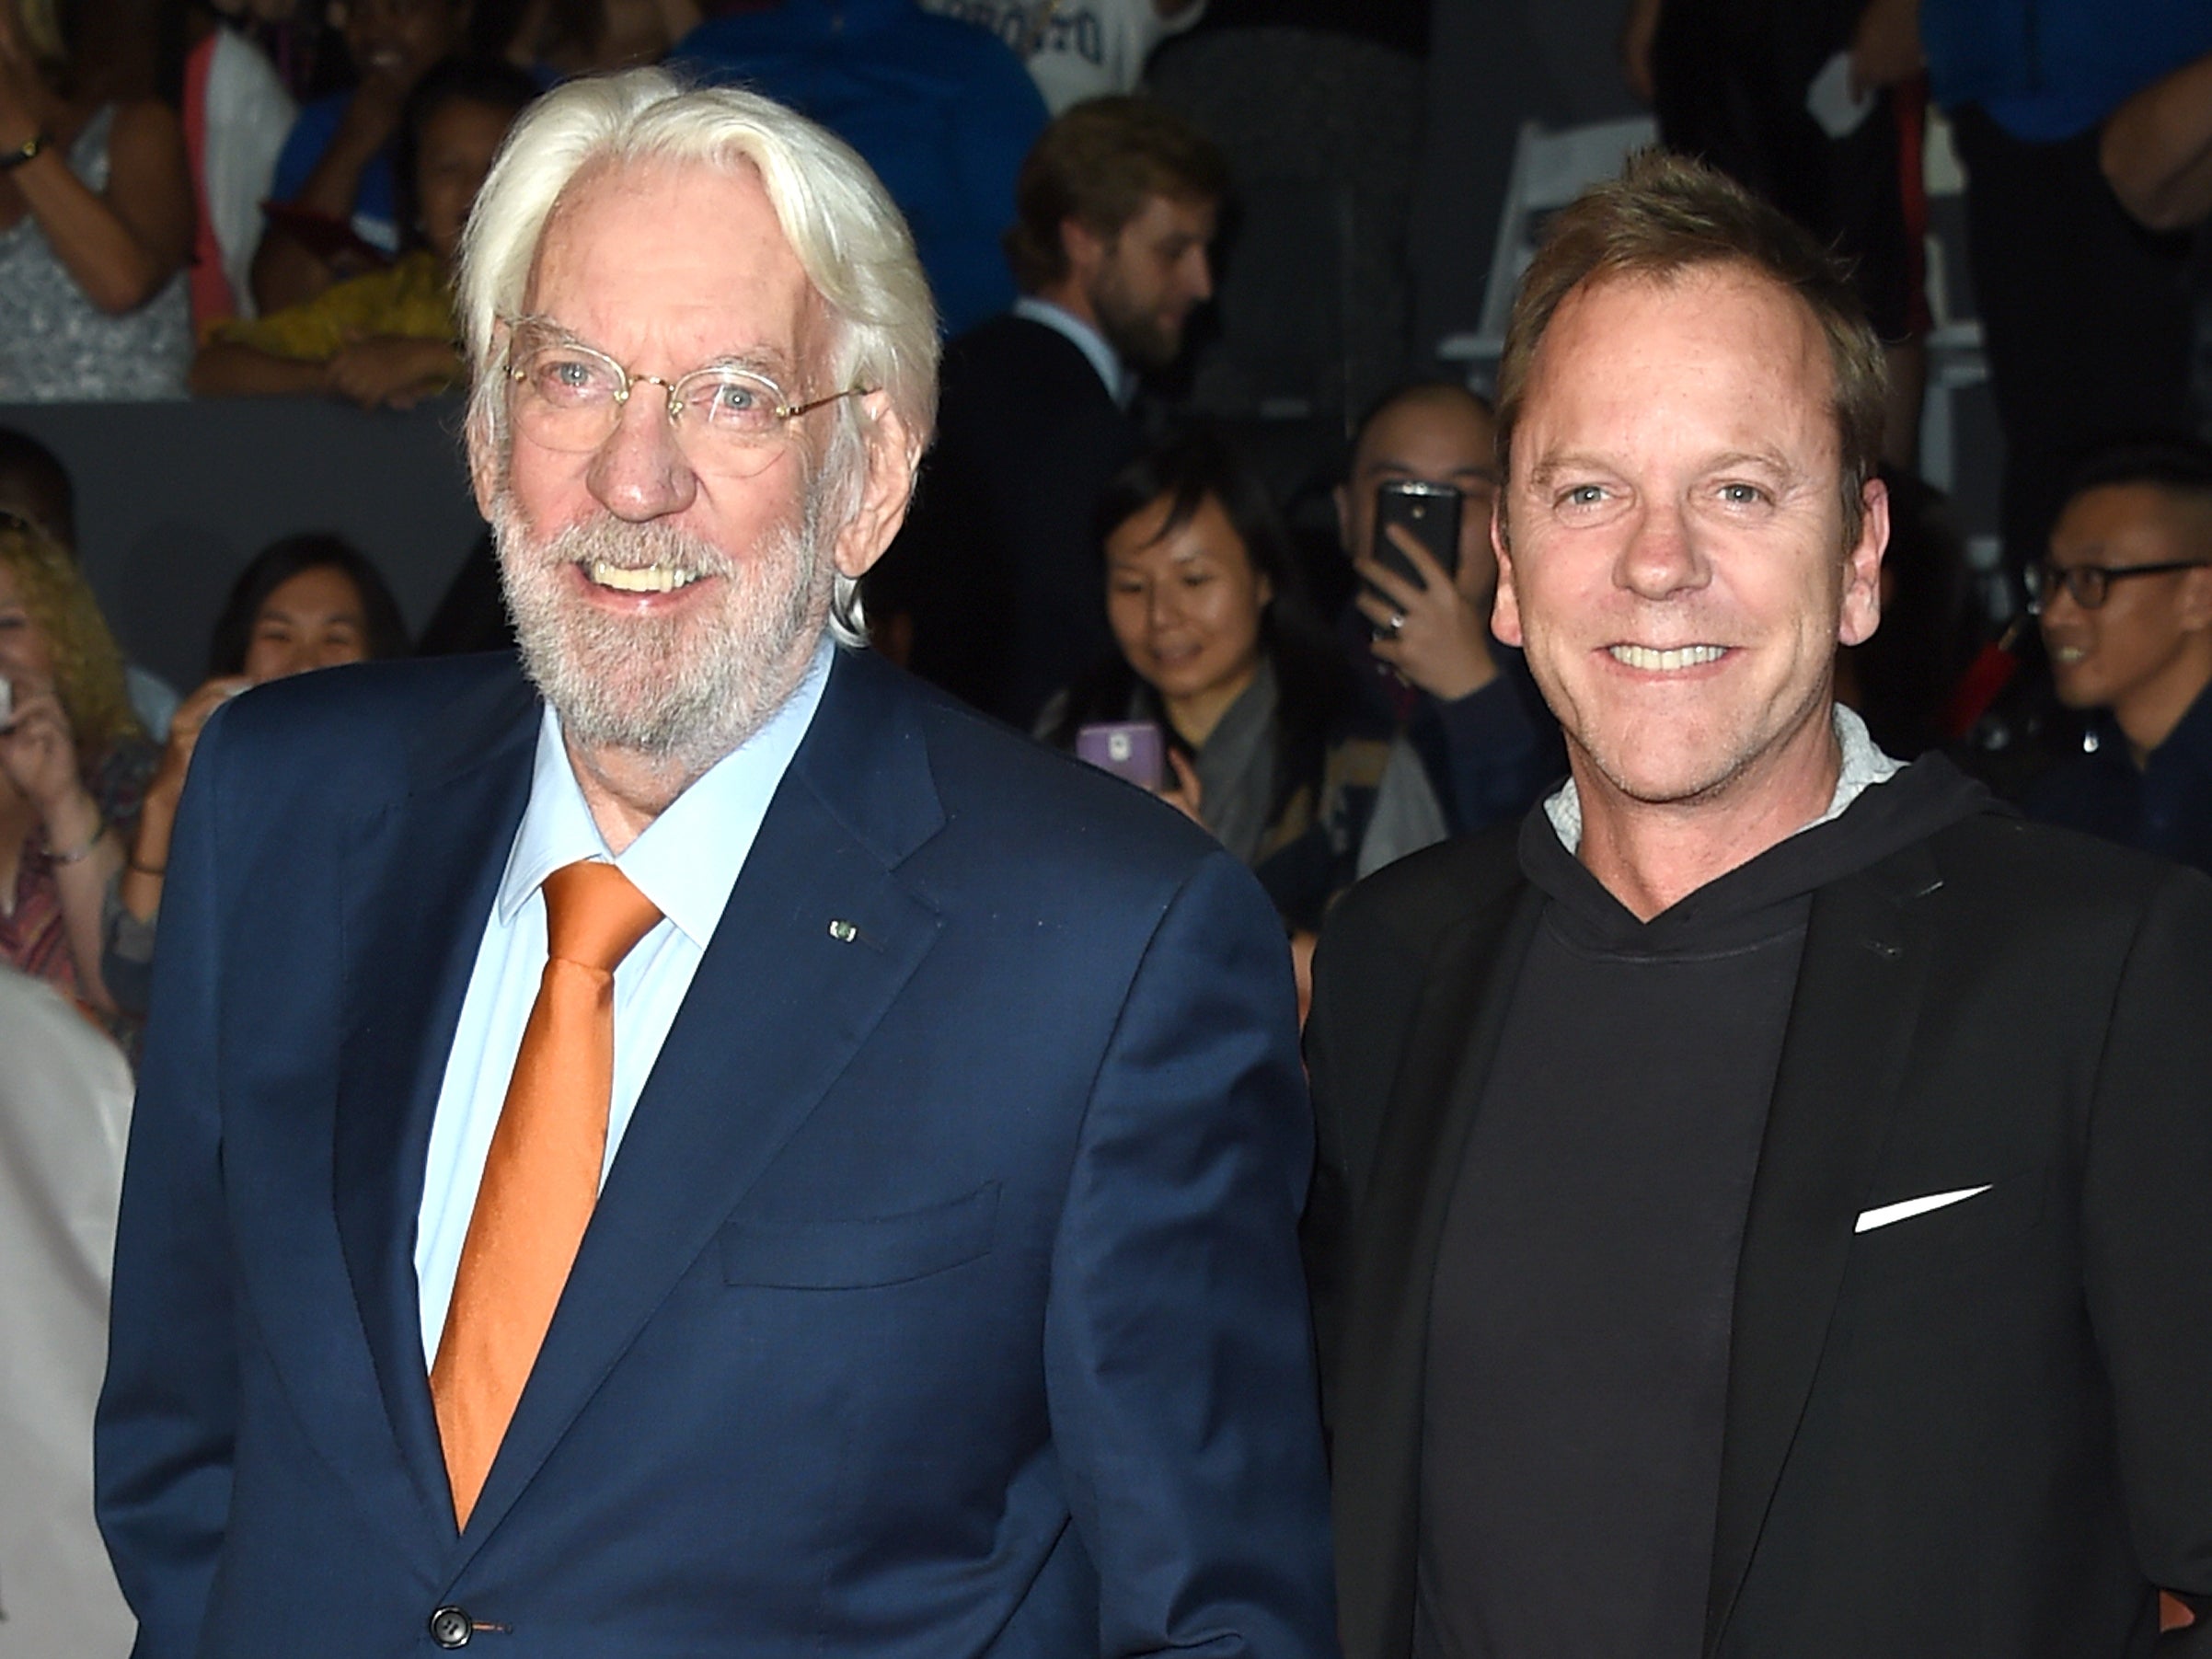 Actors Donald Sutherland (L) and Kiefer Sutherland attend the ‘Forsaken’ premiere during the 2015 Toronto International Film Festival at Roy Thomson Hall on 16 September, 2015 in Toronto, Canada